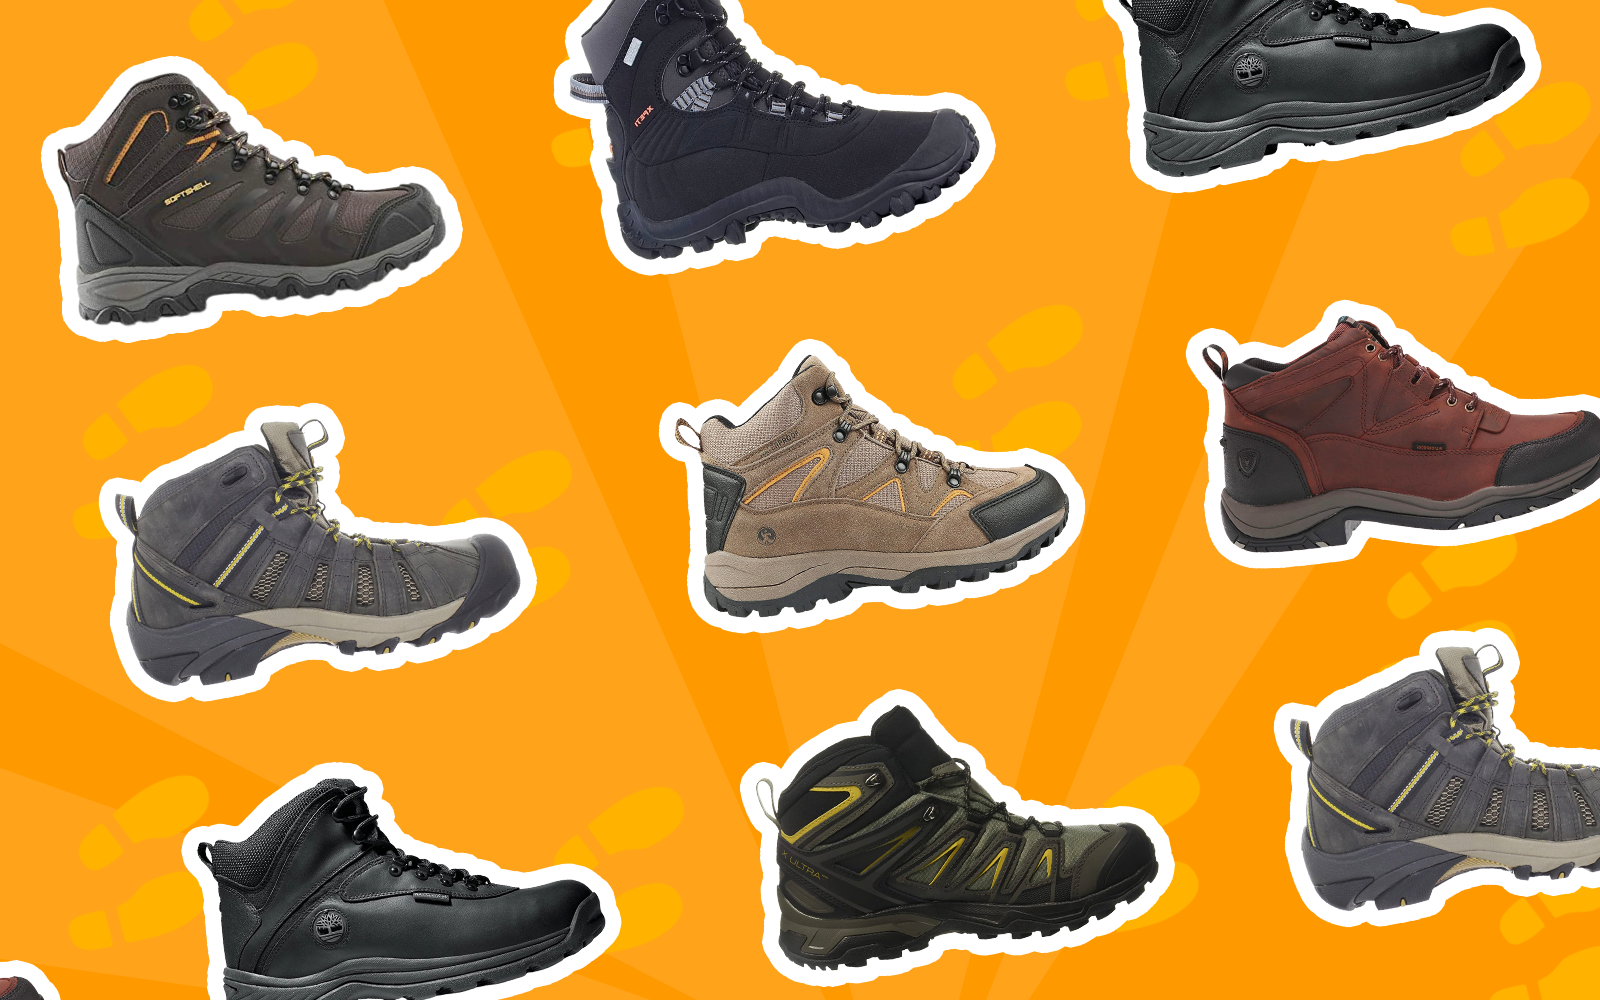 The 7 Best Hiking Boots to Buy in 2022